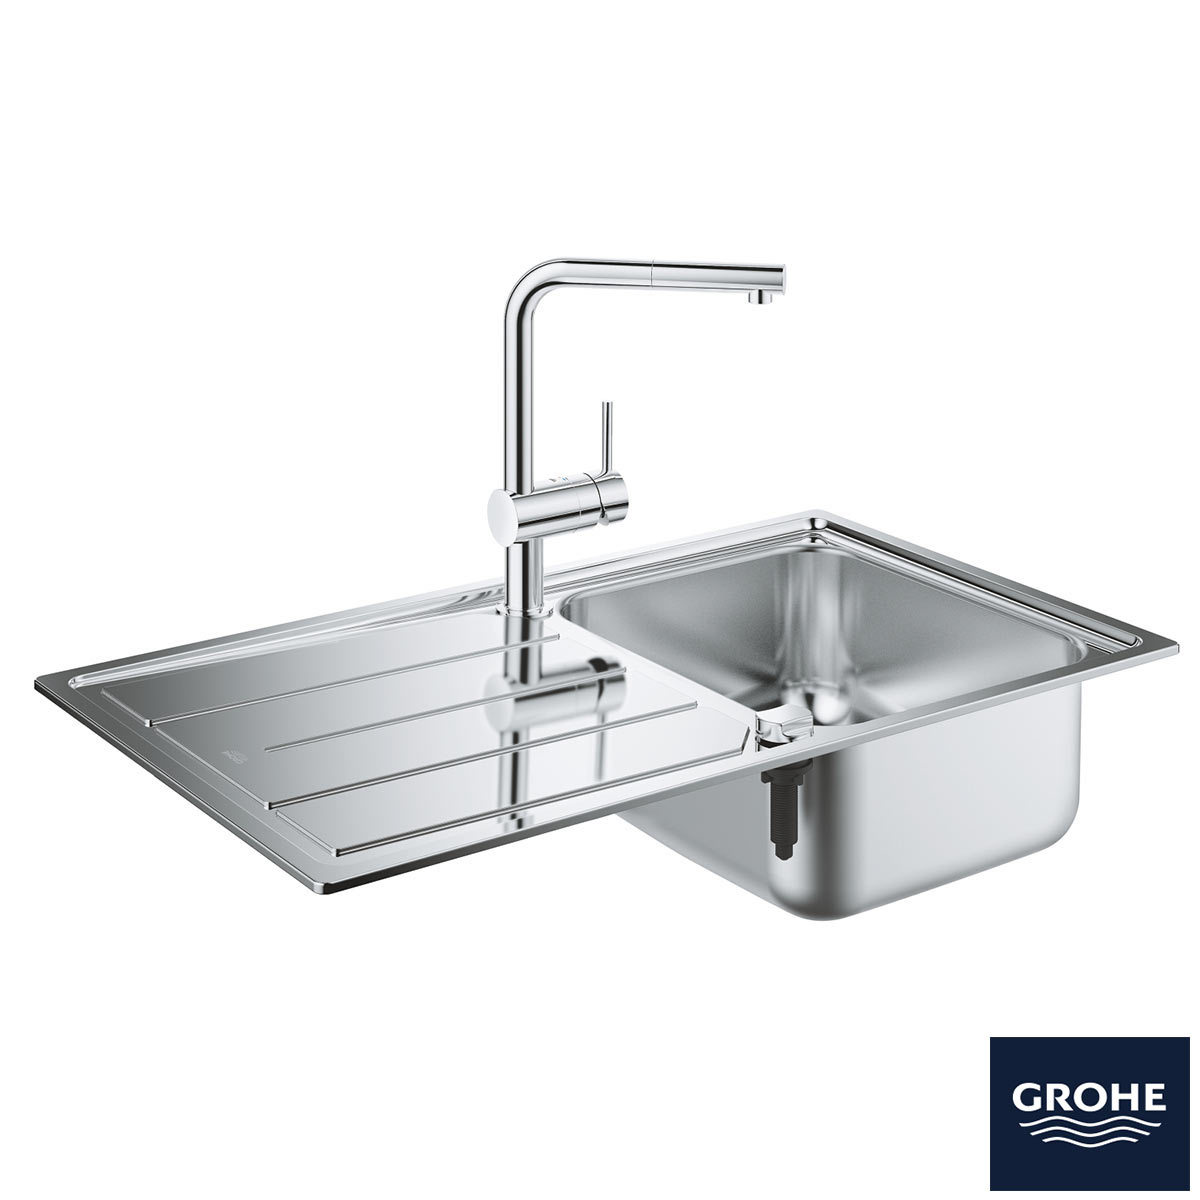 Grohe K500 Stainless Steel Kitchen Sink And Minta Single Lever Mixer Tap Bundle In Chrome Model 31573sd0 Costco Uk